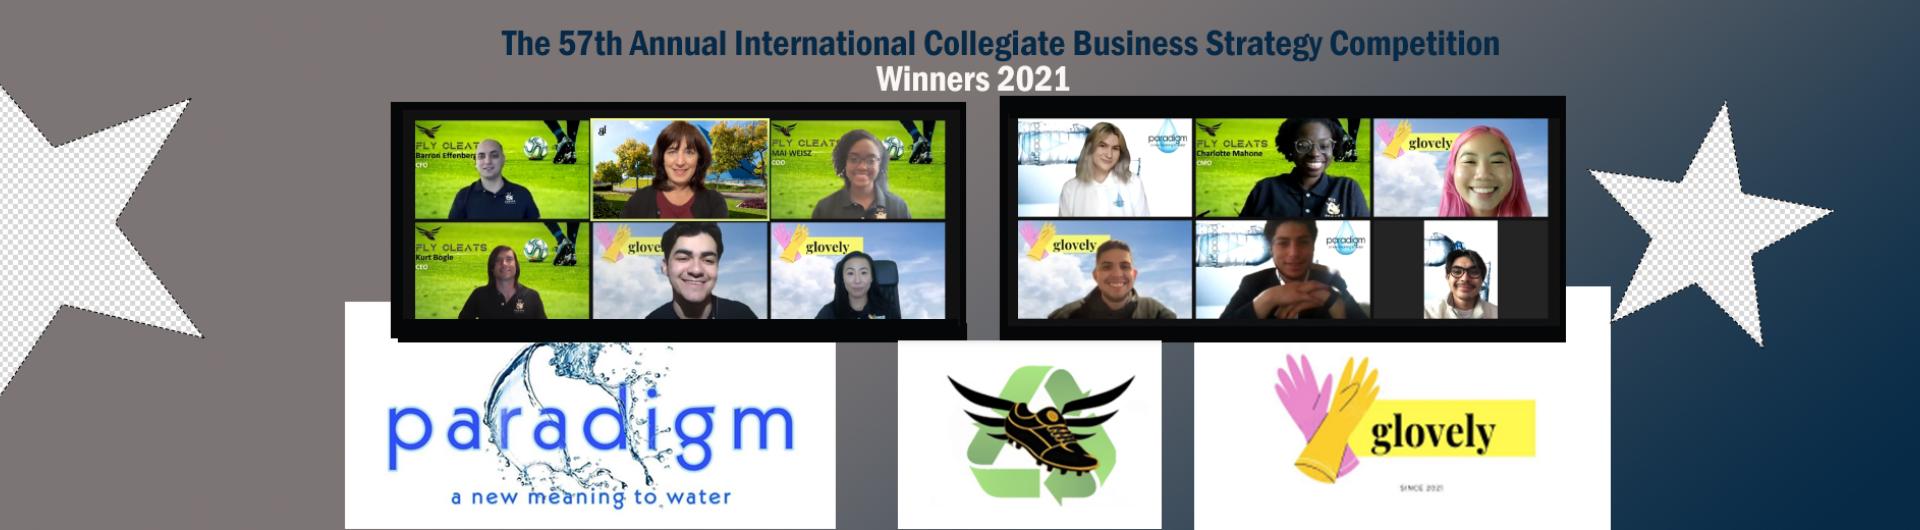 57th Annual International Collegiate Business Strategy Competition 